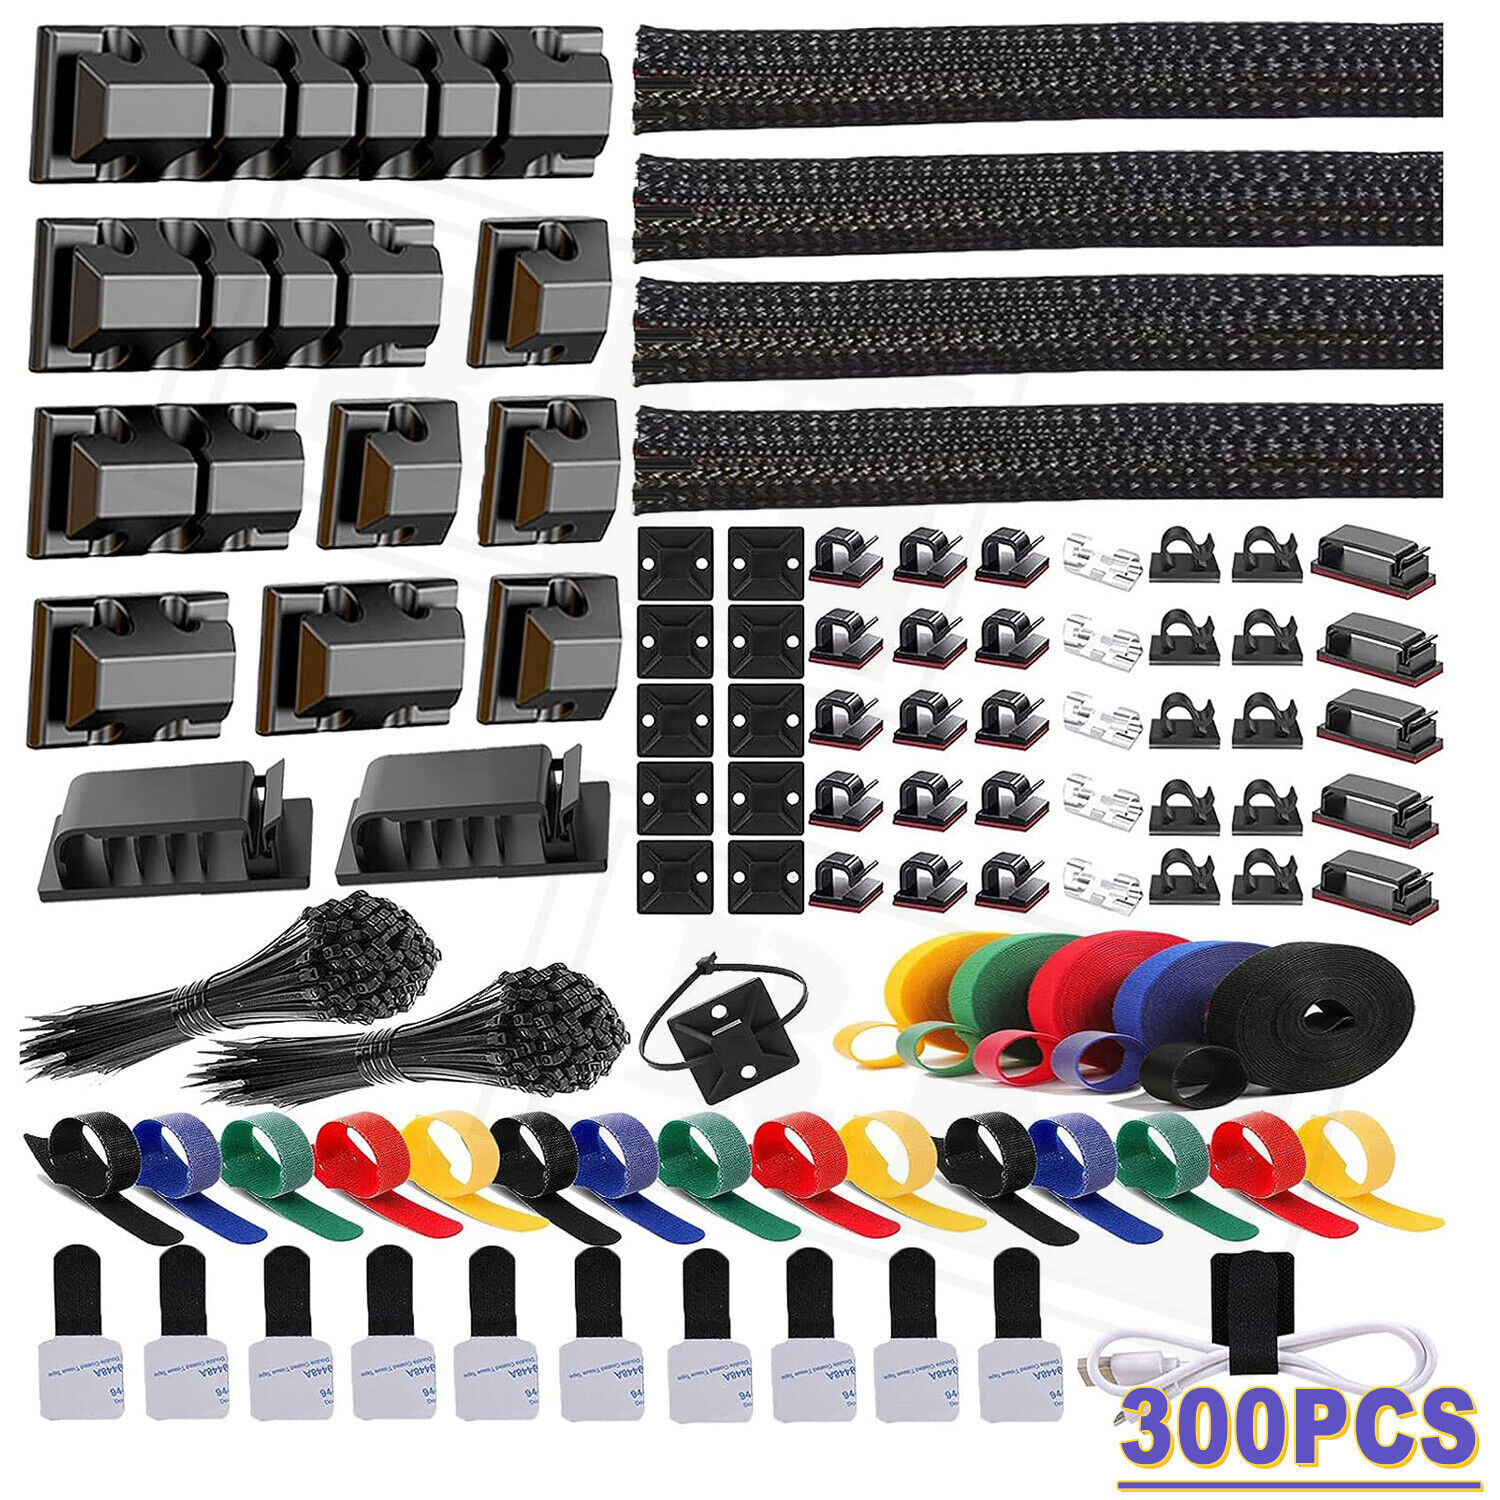 300 Pcs Cable Management Kit Wire/Cord Organizer Zip Ties Holder Adhesive Clips